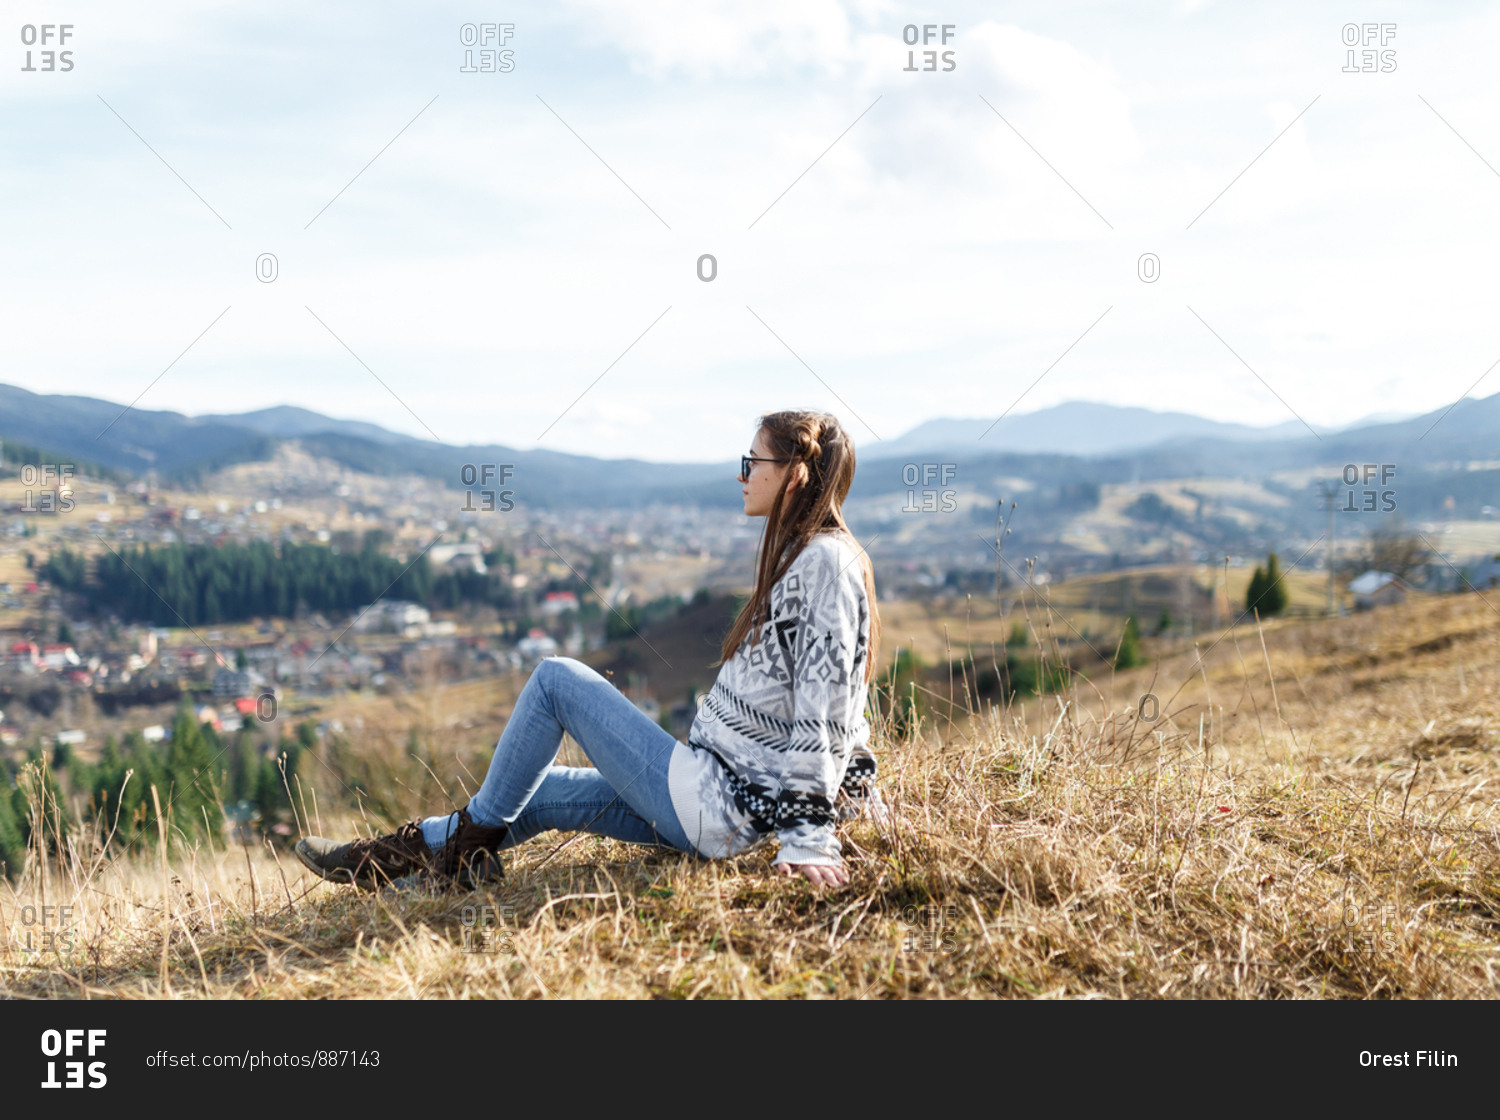 The young woman in the cozy sweater is enjoying the landscape from the foggy mountain